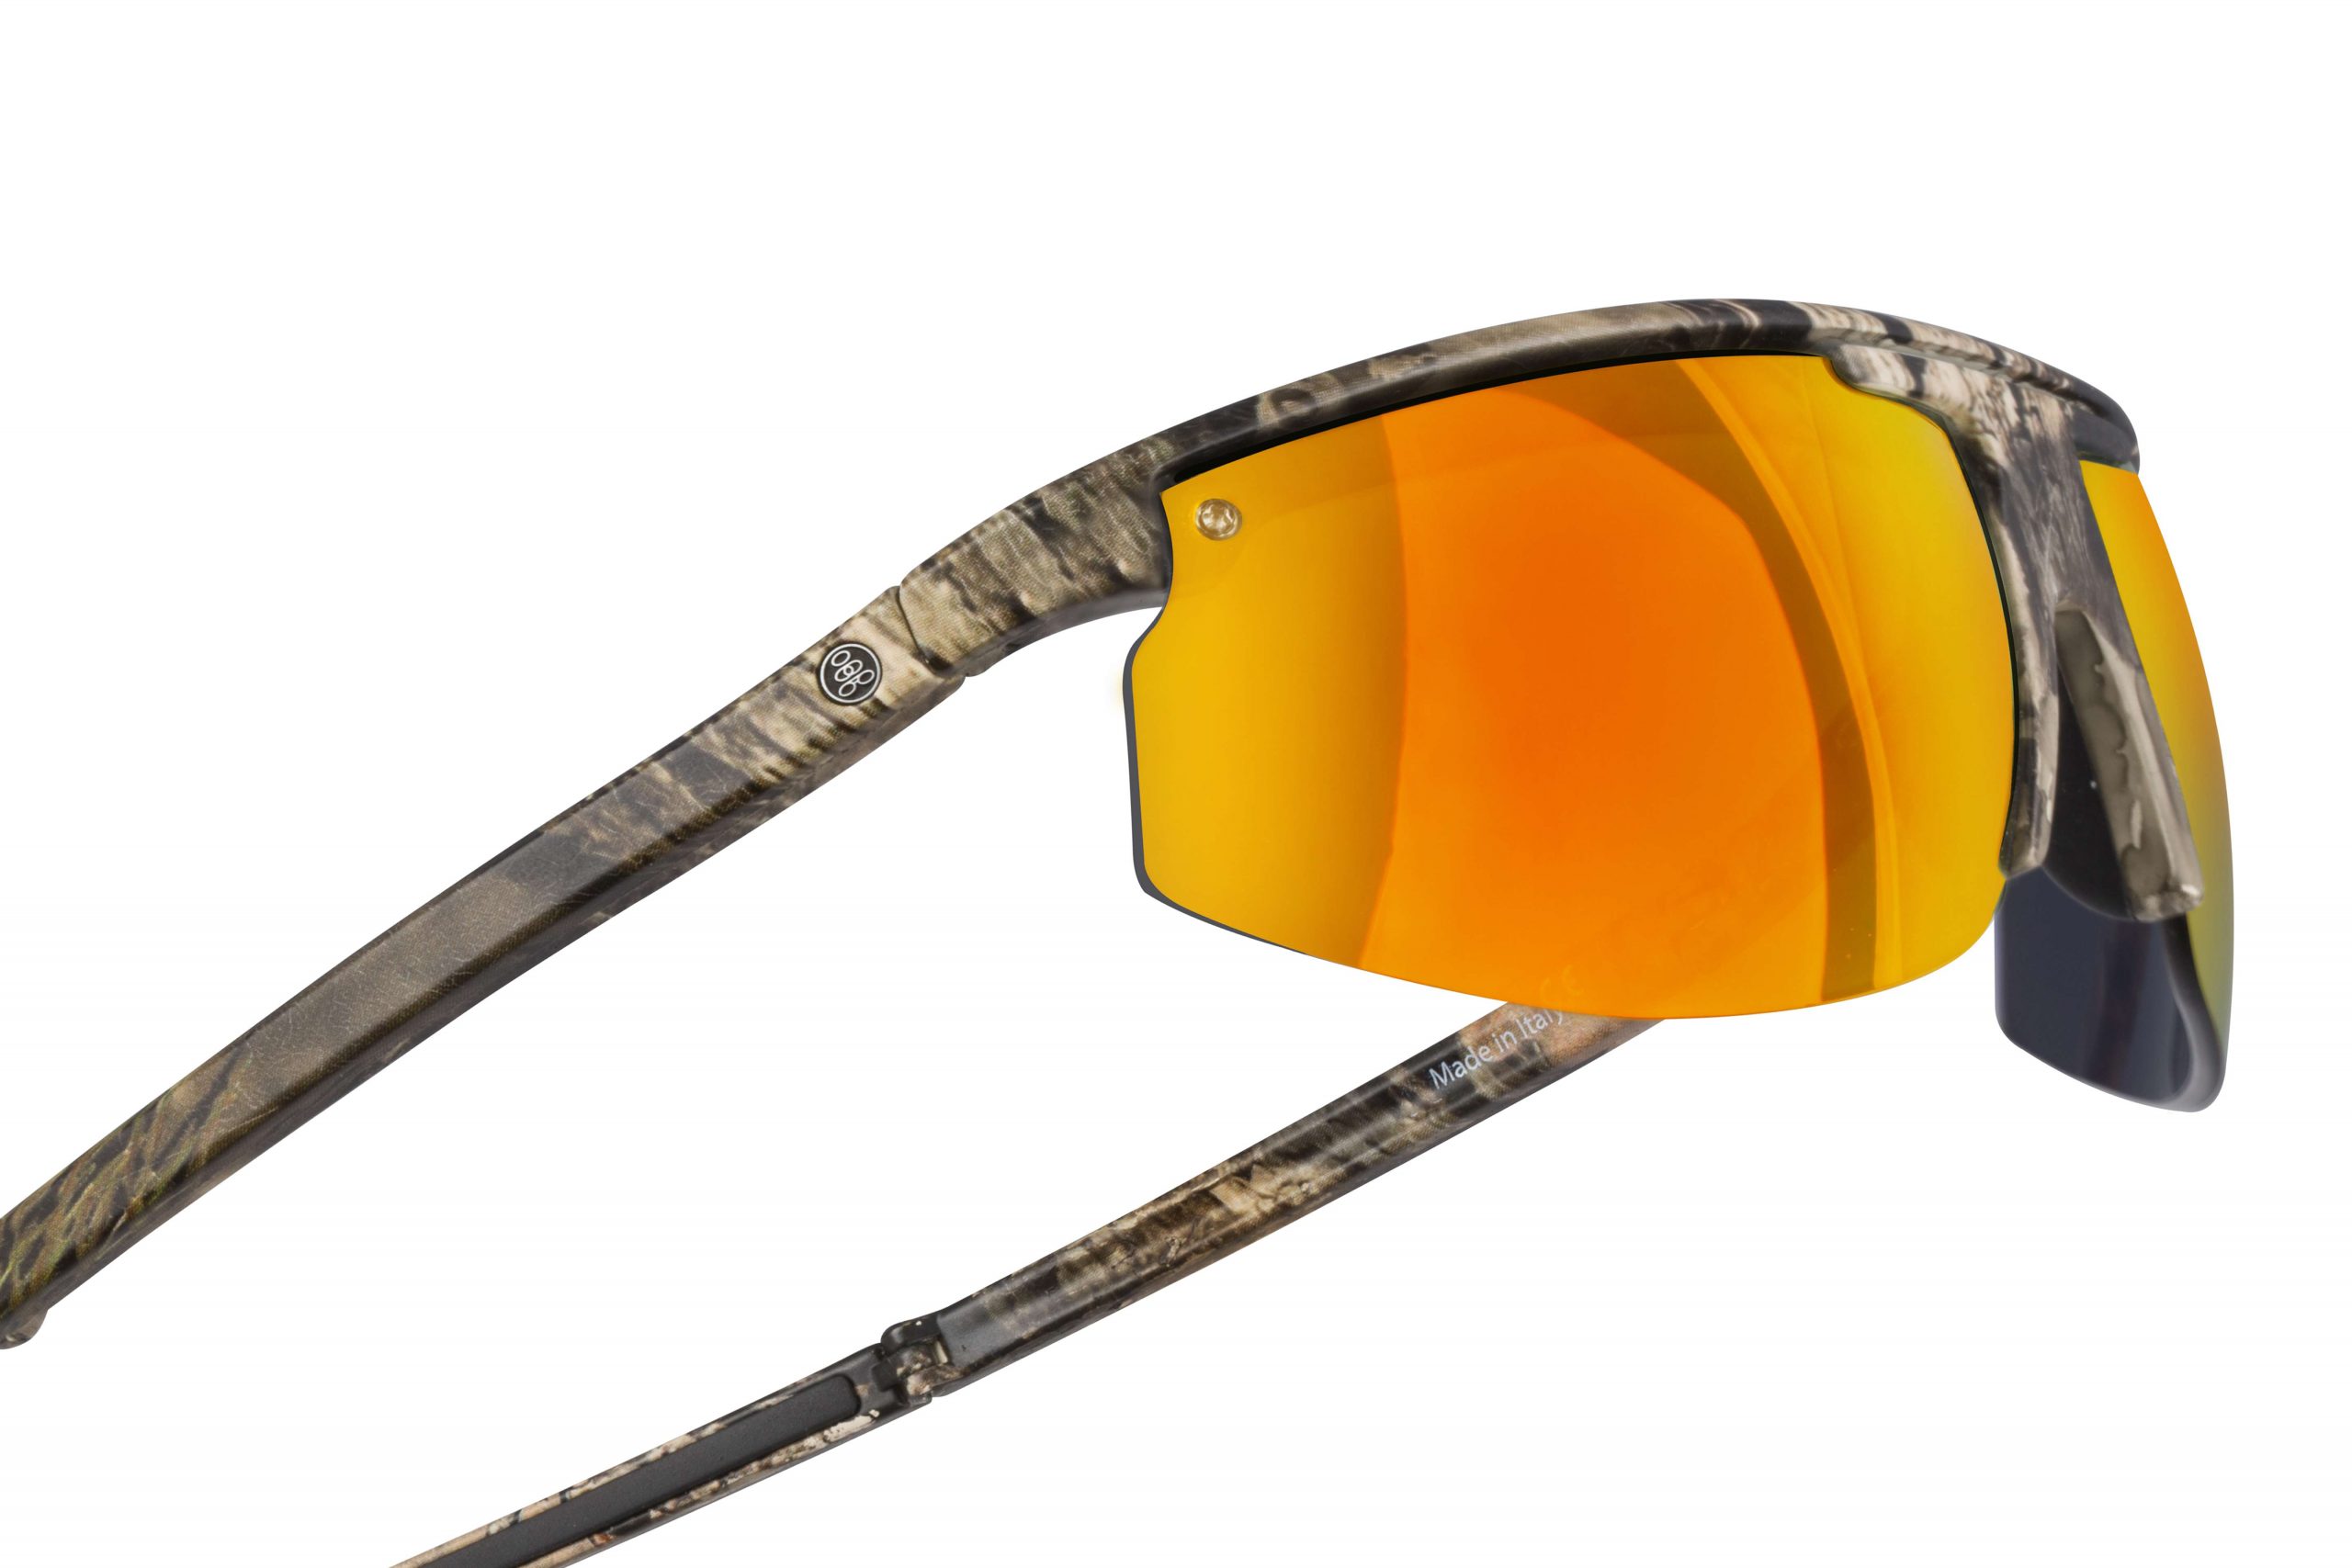 Popstar Mossy Oak<BR>
Popticals<br>
Anglers demand the best gear, especially when it comes to optics. Popticals partnered with Mossy Oak to create the ultimate fishing sunglasses by combining our award-winning portable design and NYDEFâ¢ nylon lenses with the most popular camo pattern on the market. NYDEF lenses manufactured for Popticals by Carl Zeiss Vision provide the same clarity as glass at a fraction of the weight, allowing anglers to see sharper details beneath the surface of the water. The patented design featuring the FL2 Micro-Rail SystemÂ® enables the sunglasses to collapse down and fit inside a portable hard case, keeping them safe from damage and easily accessible. 
